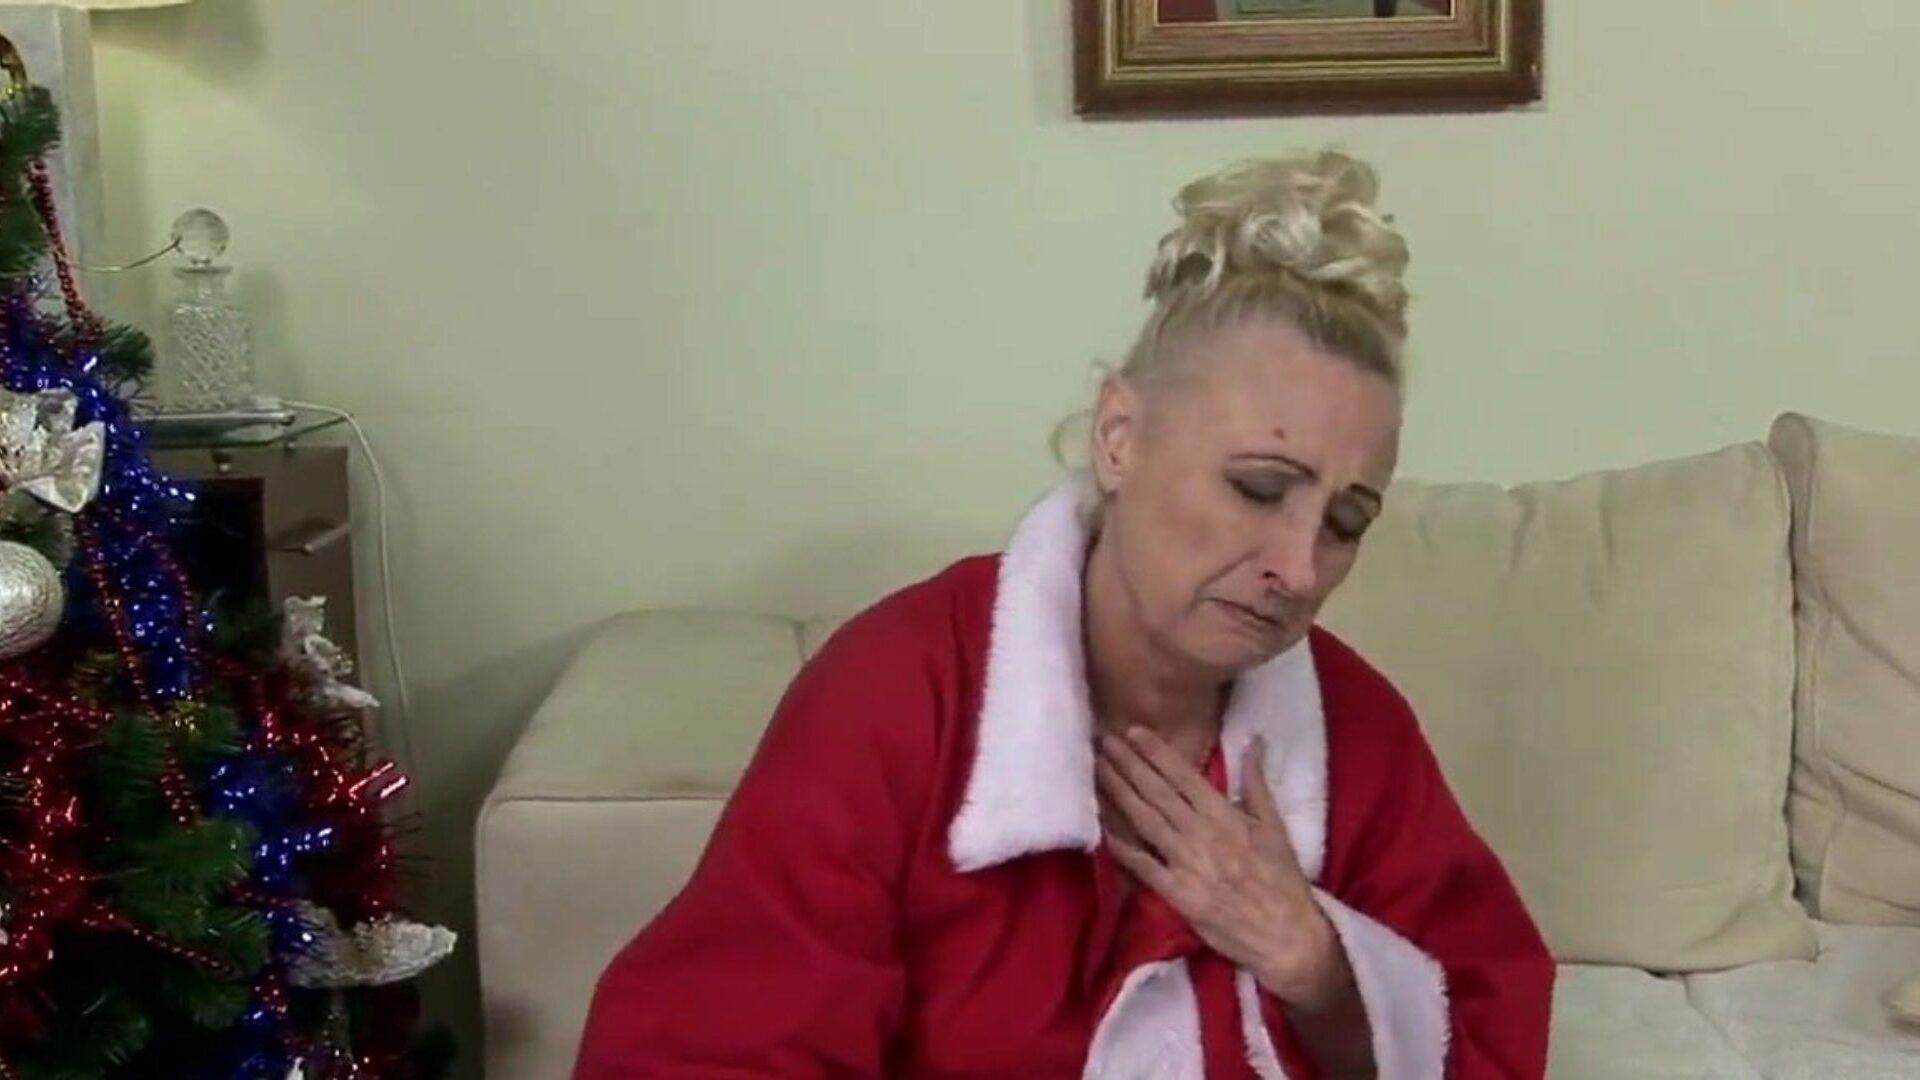 Granny Doesn't Want to Spend Christmas Alone: Free Porn e8 Watch Granny Doesn't Want to Spend Christmas Alone movie scene on xHamster - the ultimate archive of free-for-all Free Granny & Granny Free Tube HD porn tube vids